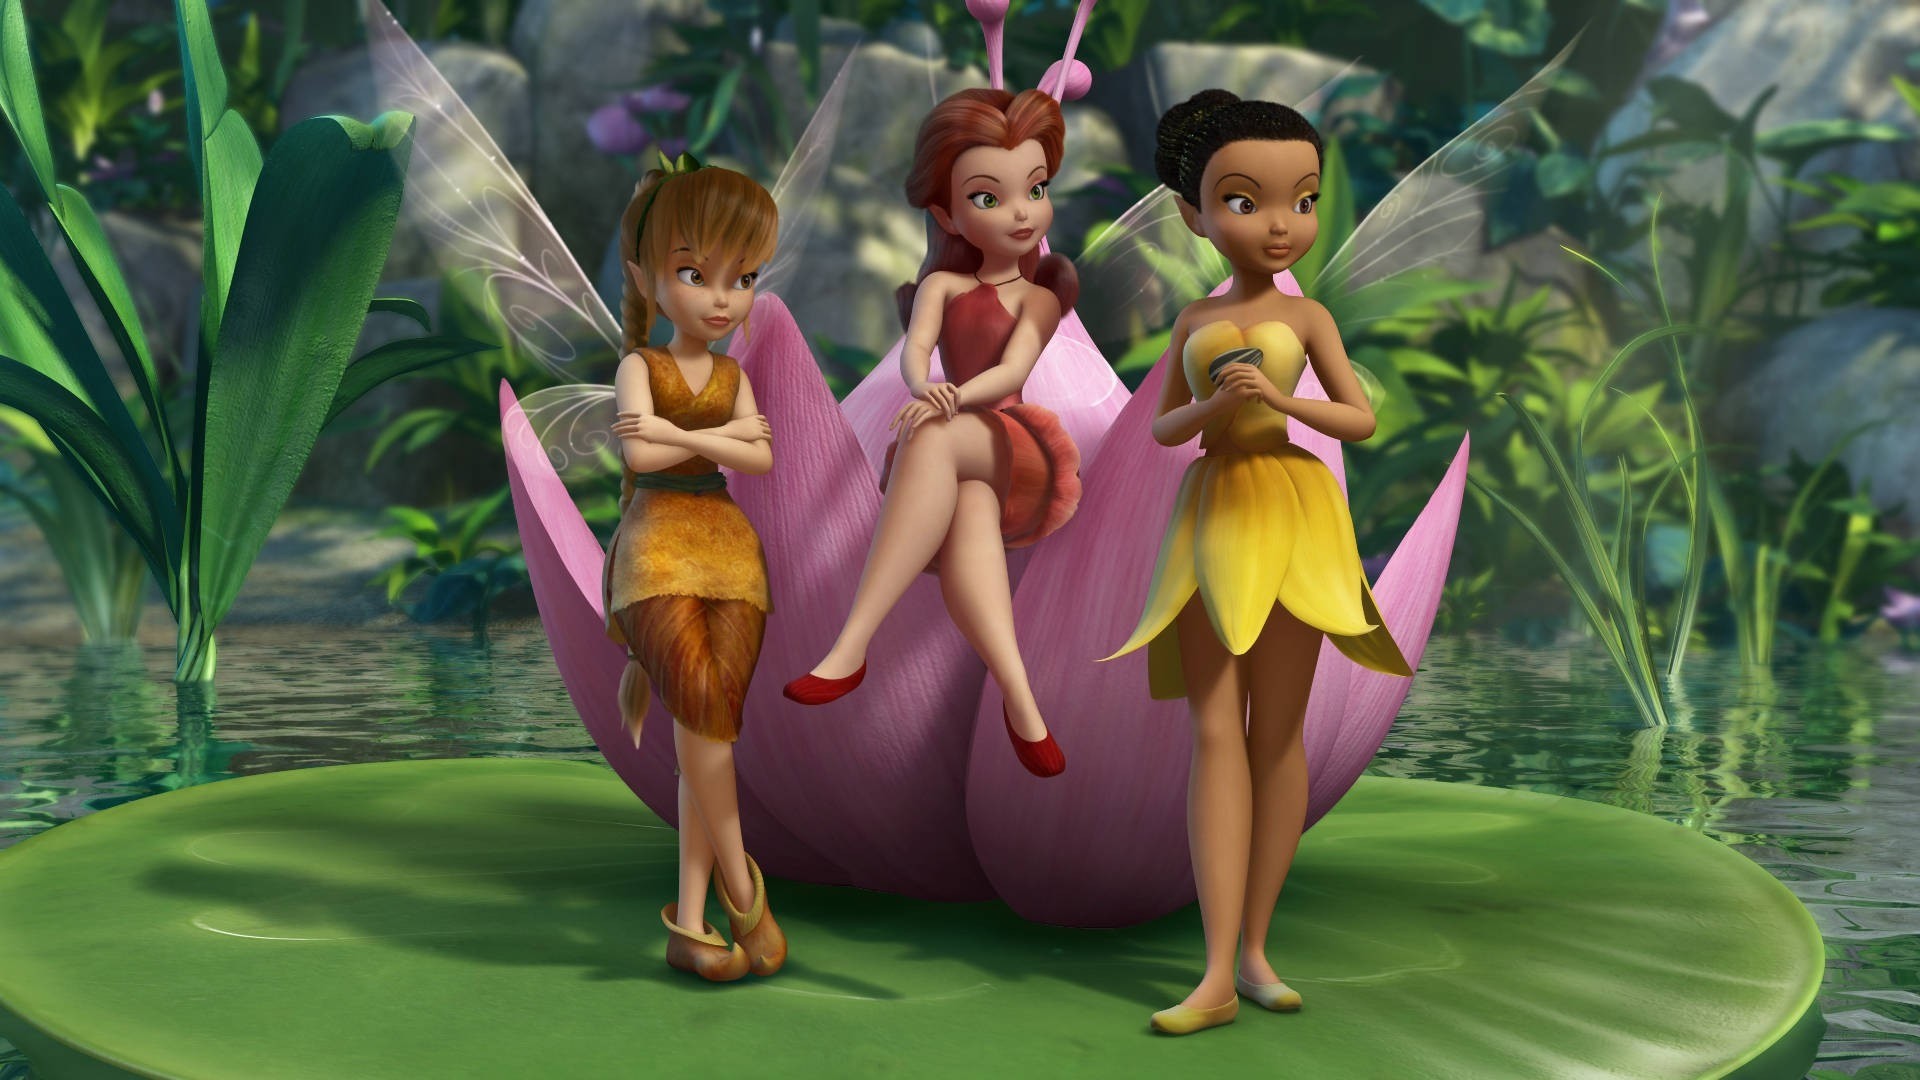 1920x1080 Tinker Bell And Friends wallpapers Wallpapers) – Wallpapers For Desktop